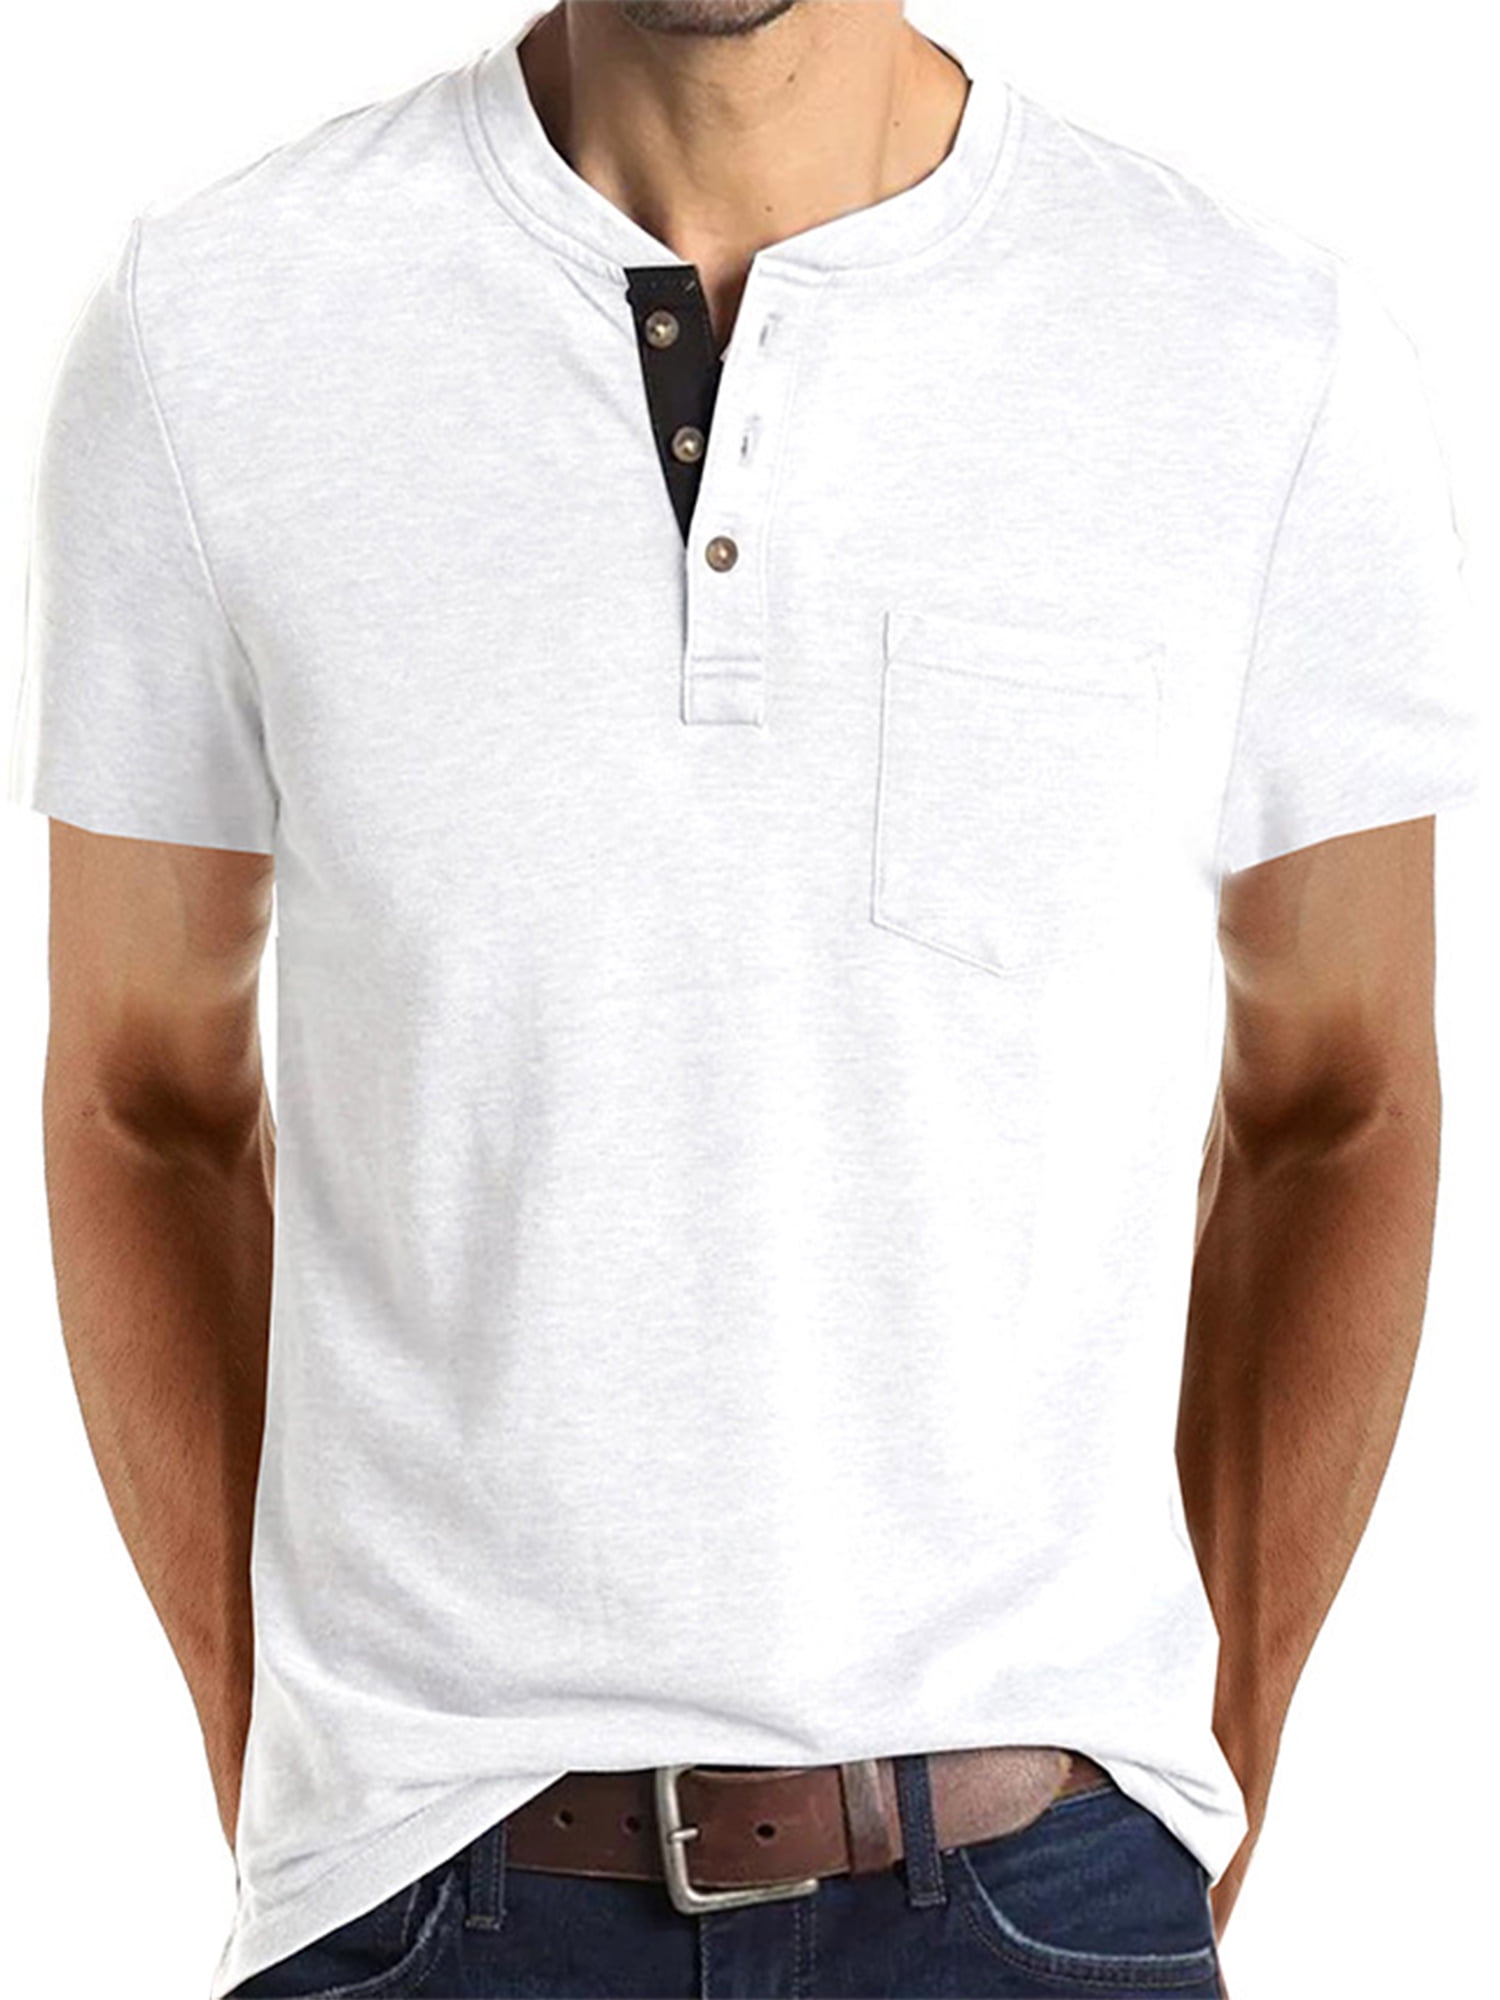 Plain Snap Button Polo T Shirt Size XS to 5XL,Suitable for Work/Leisure £5.99! 